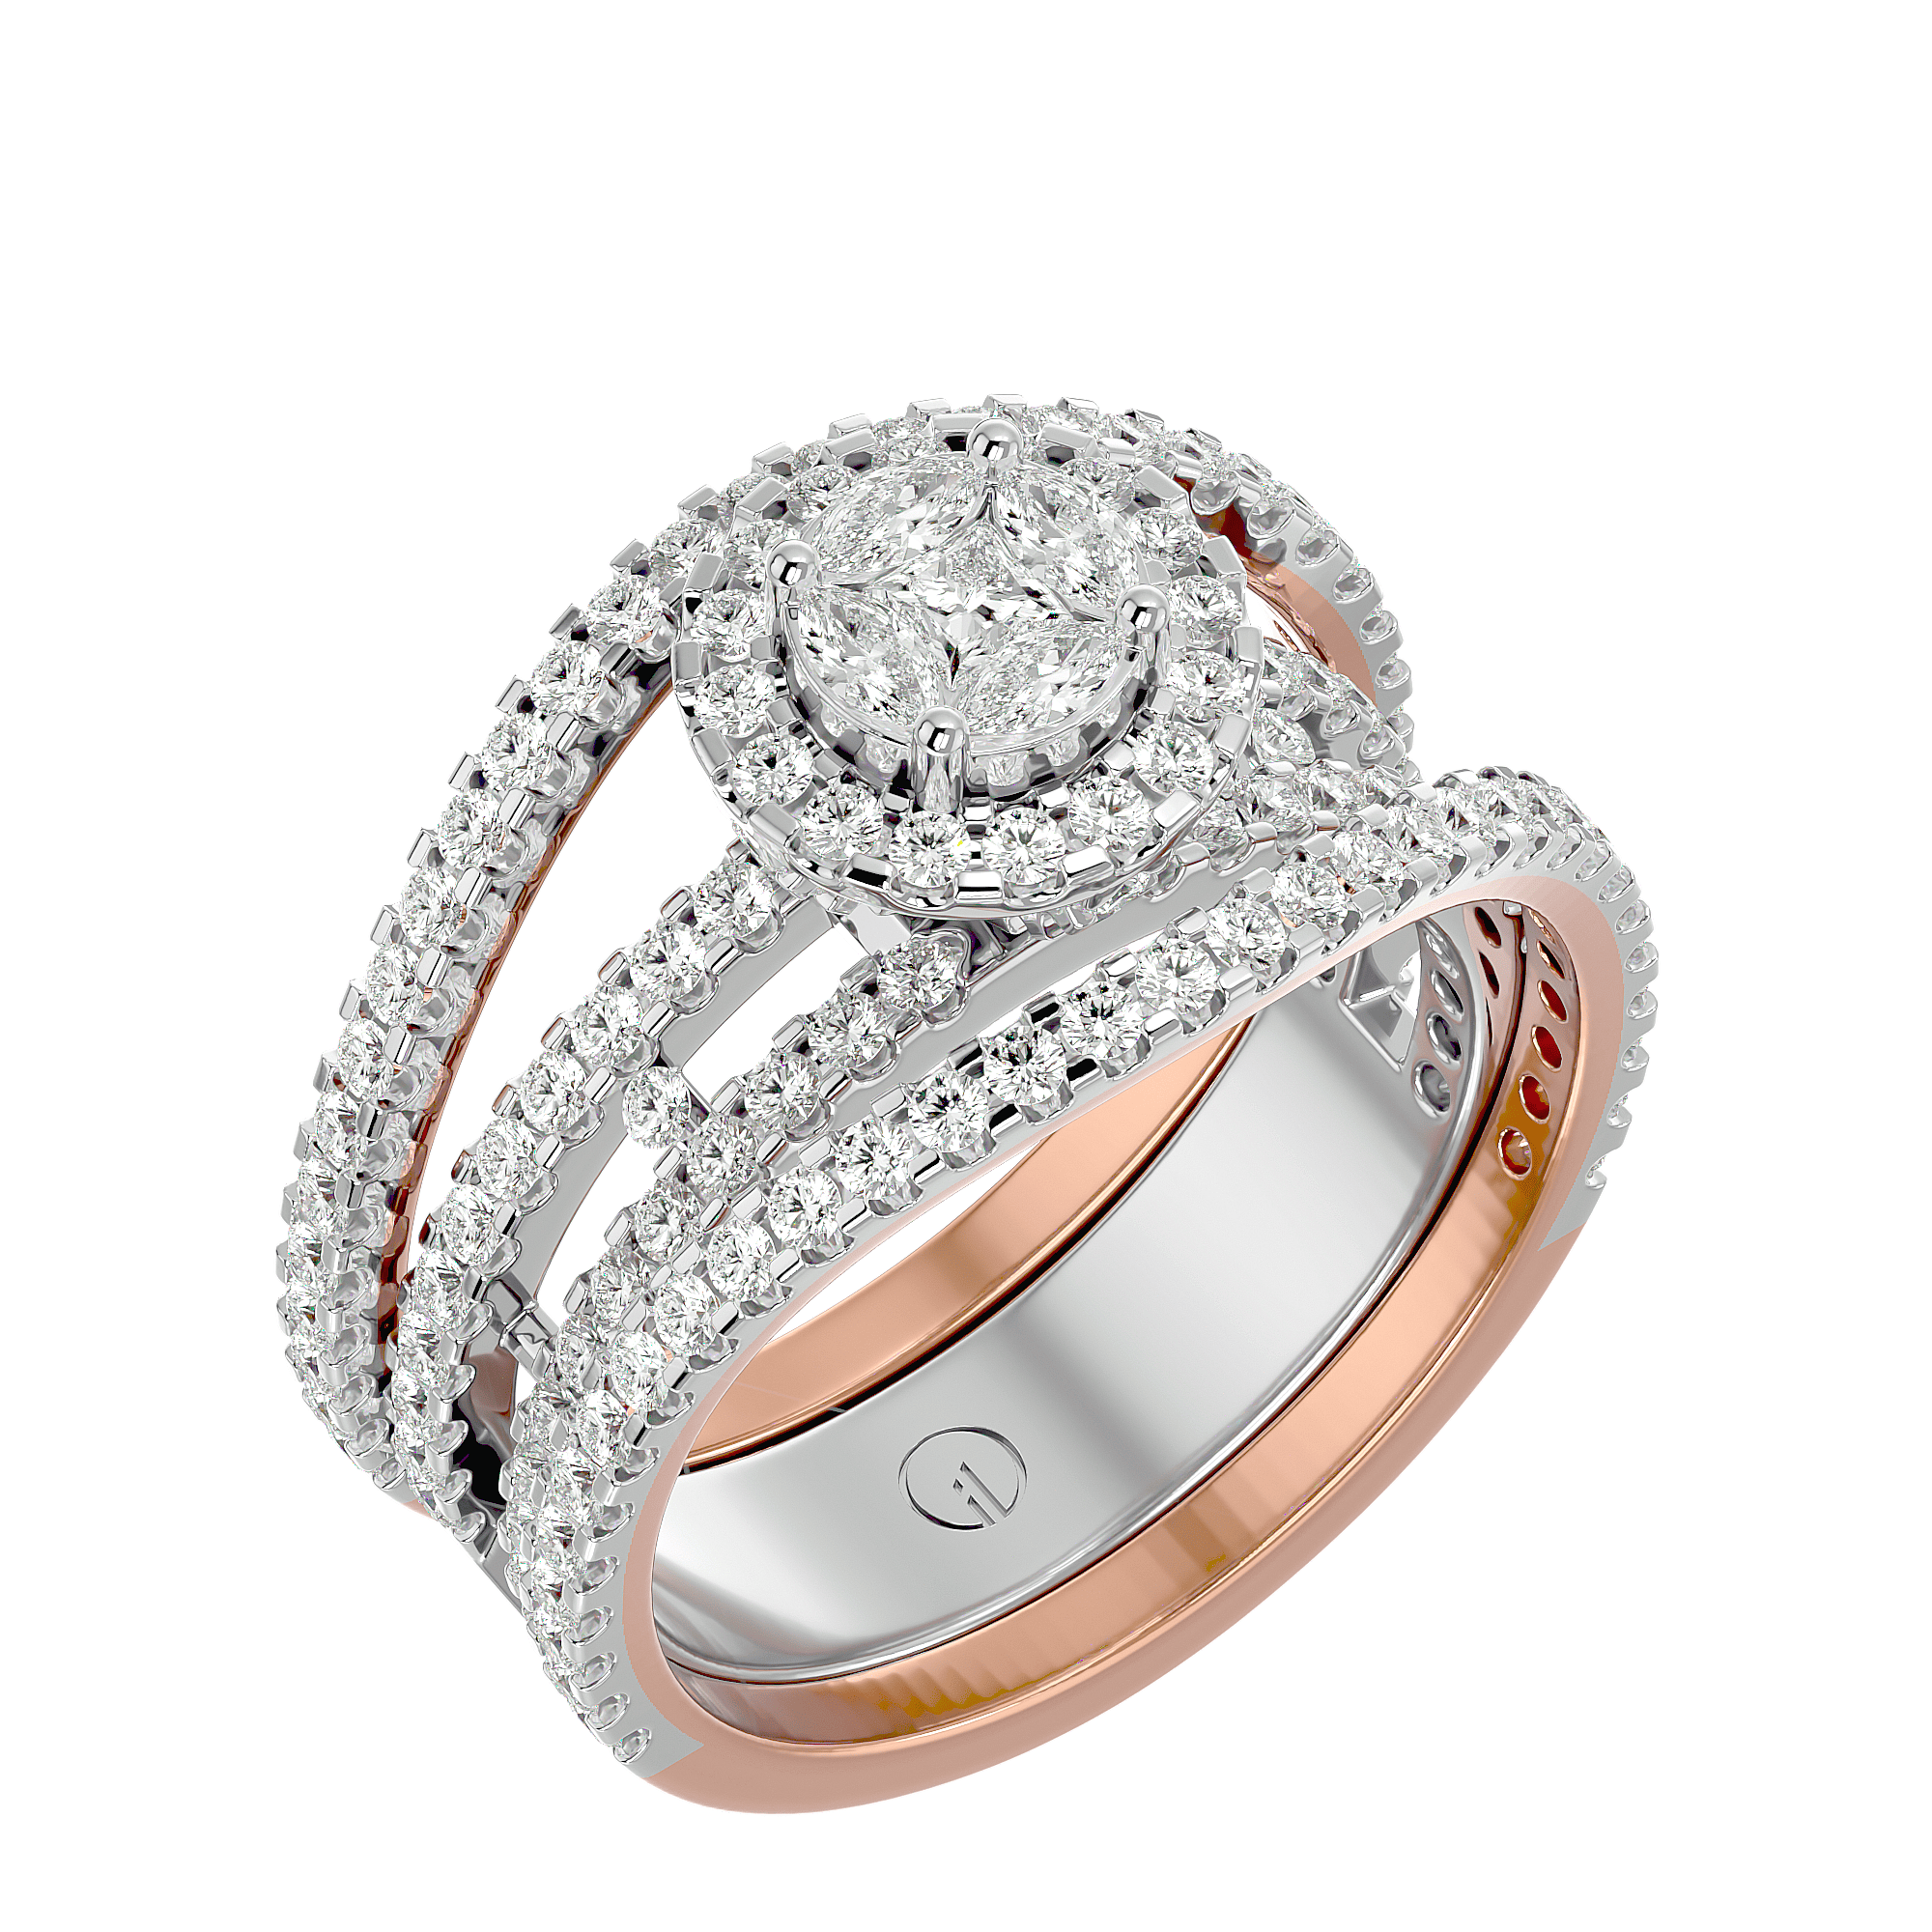 Splendid-Appeal-Solitaire-Illusion-Diamond-Ring-RG2137A-View-01